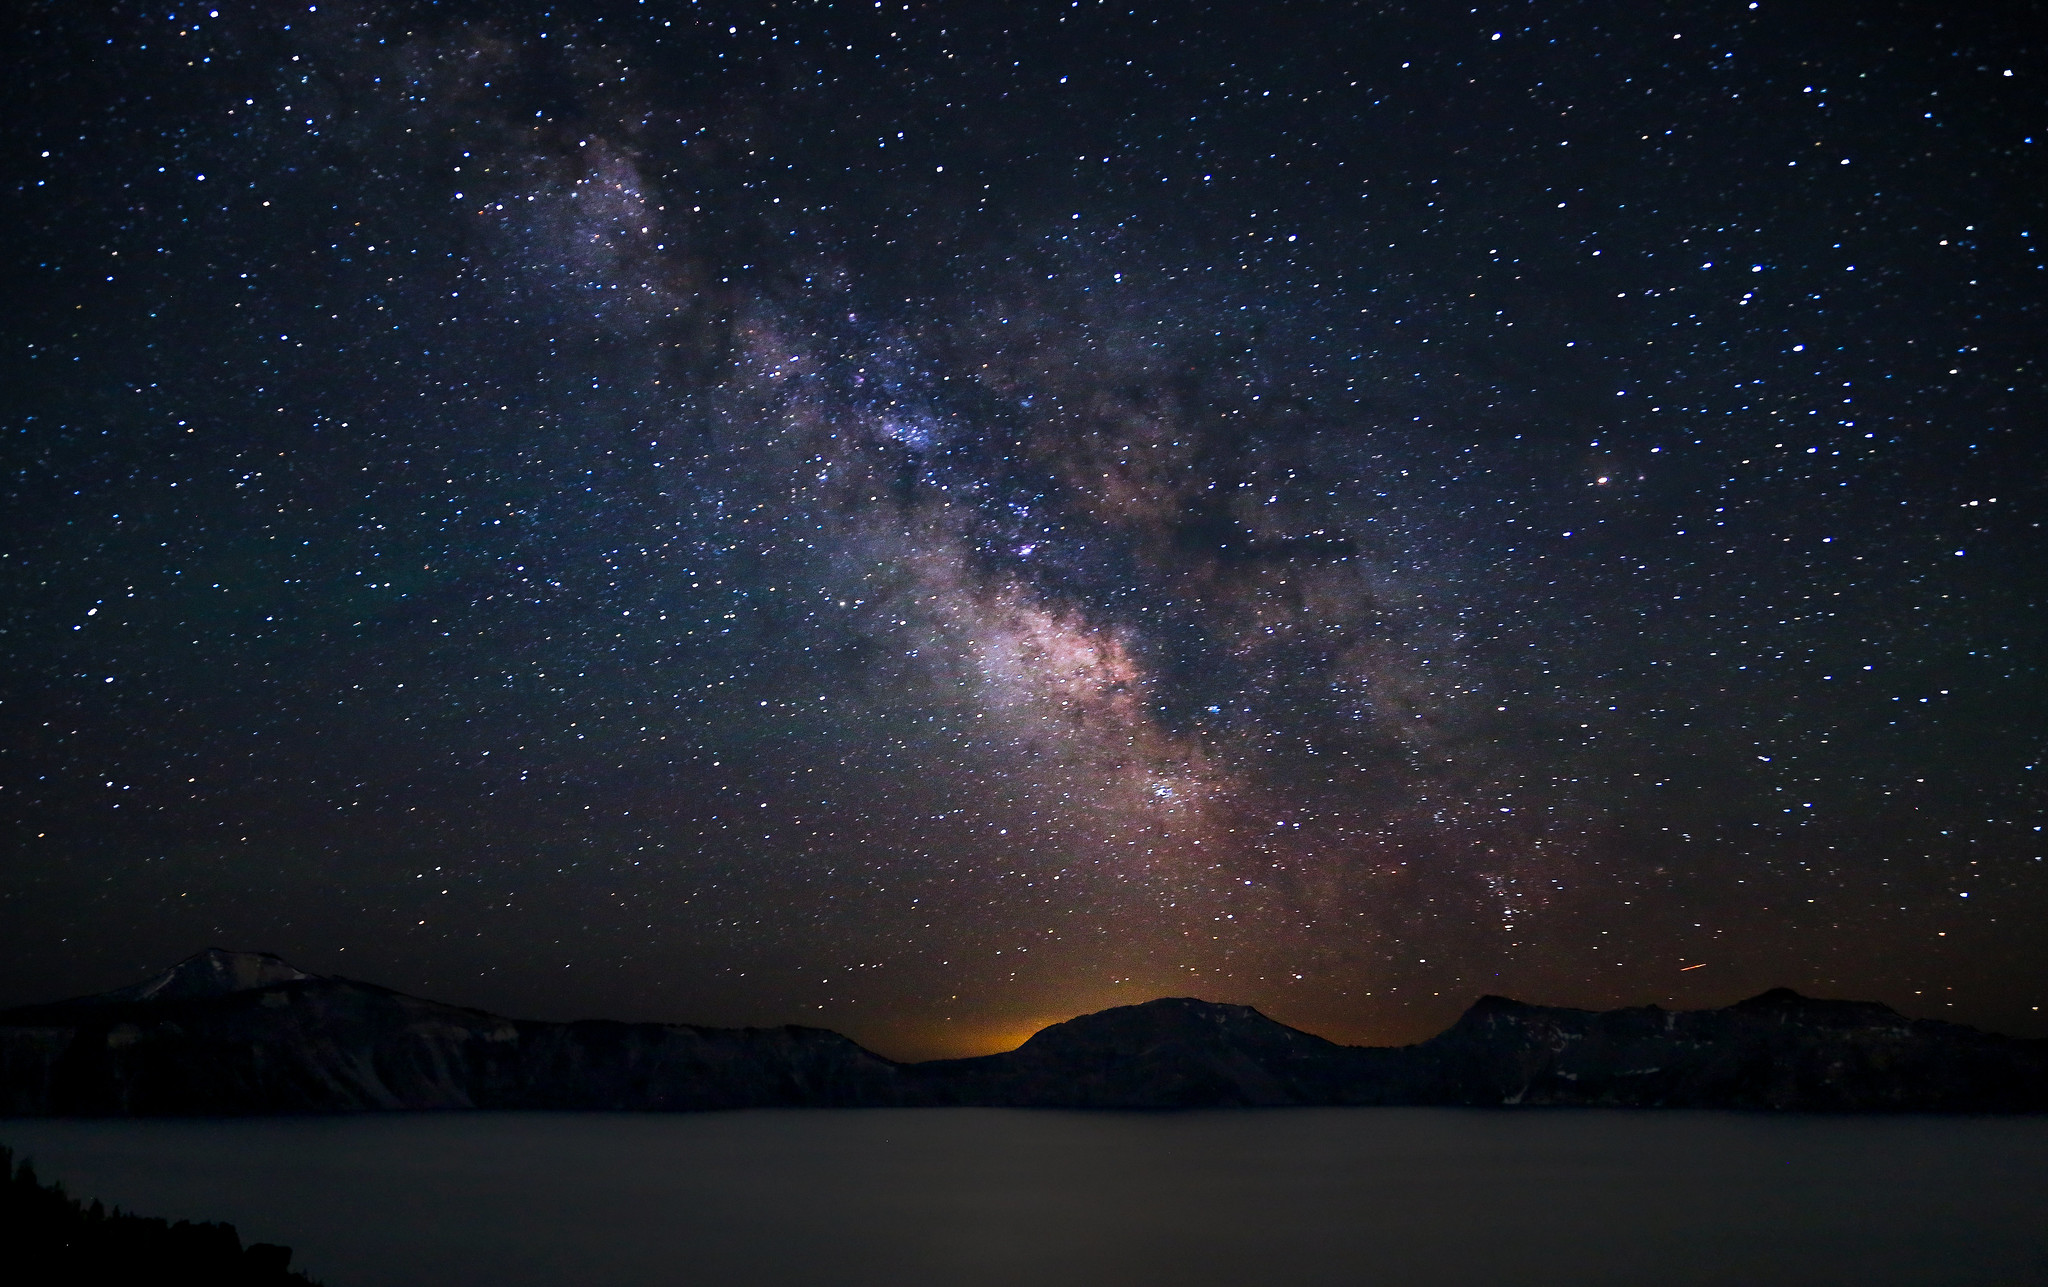 sky viewing in Oregon at Crater Lake by Joe Parks on  Flickr